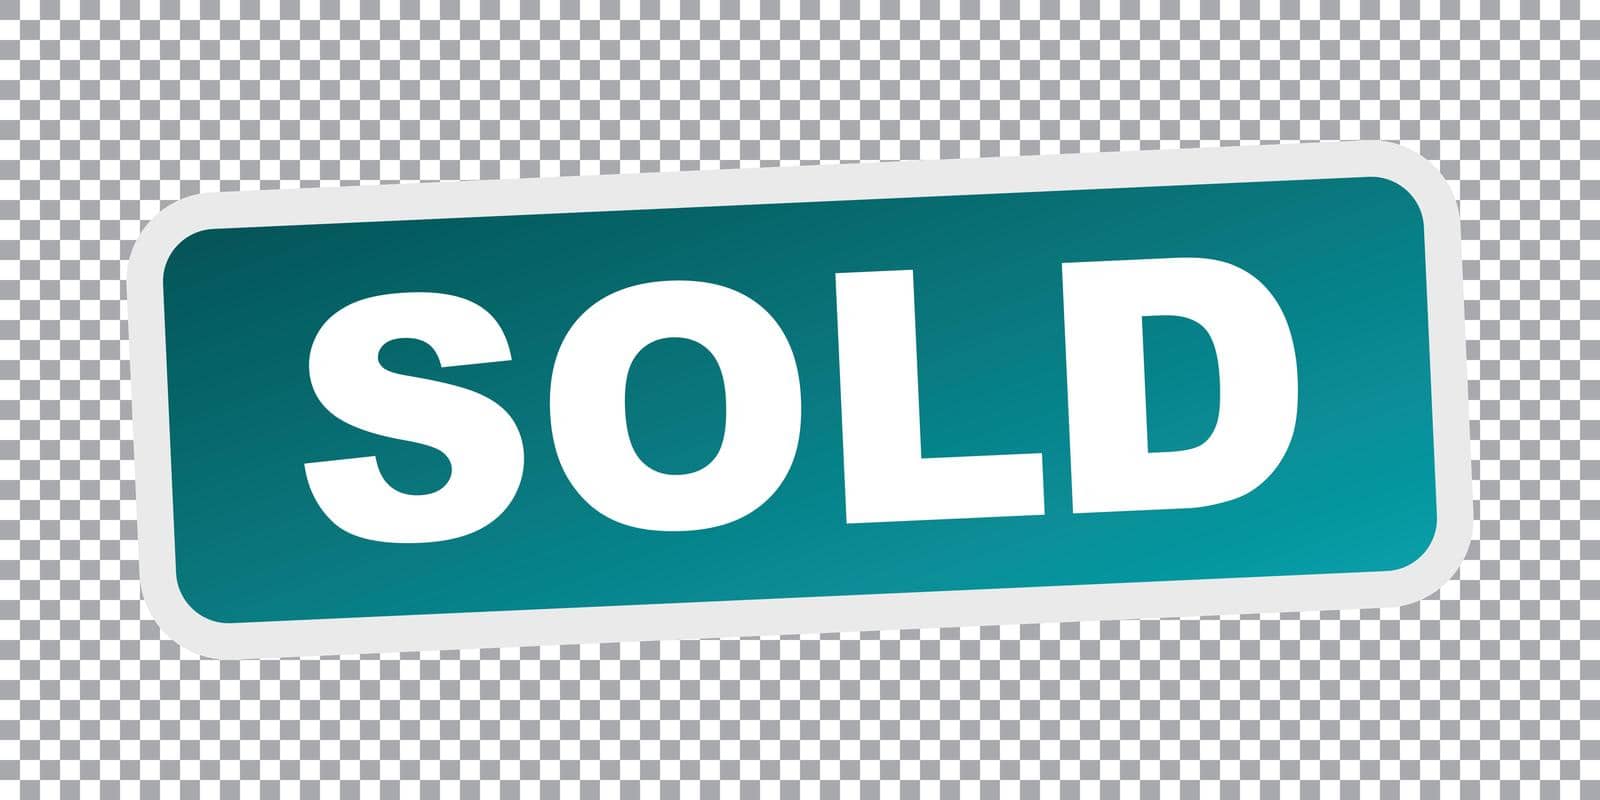 SOLD stamp. Flat vector icon by LysenkoA